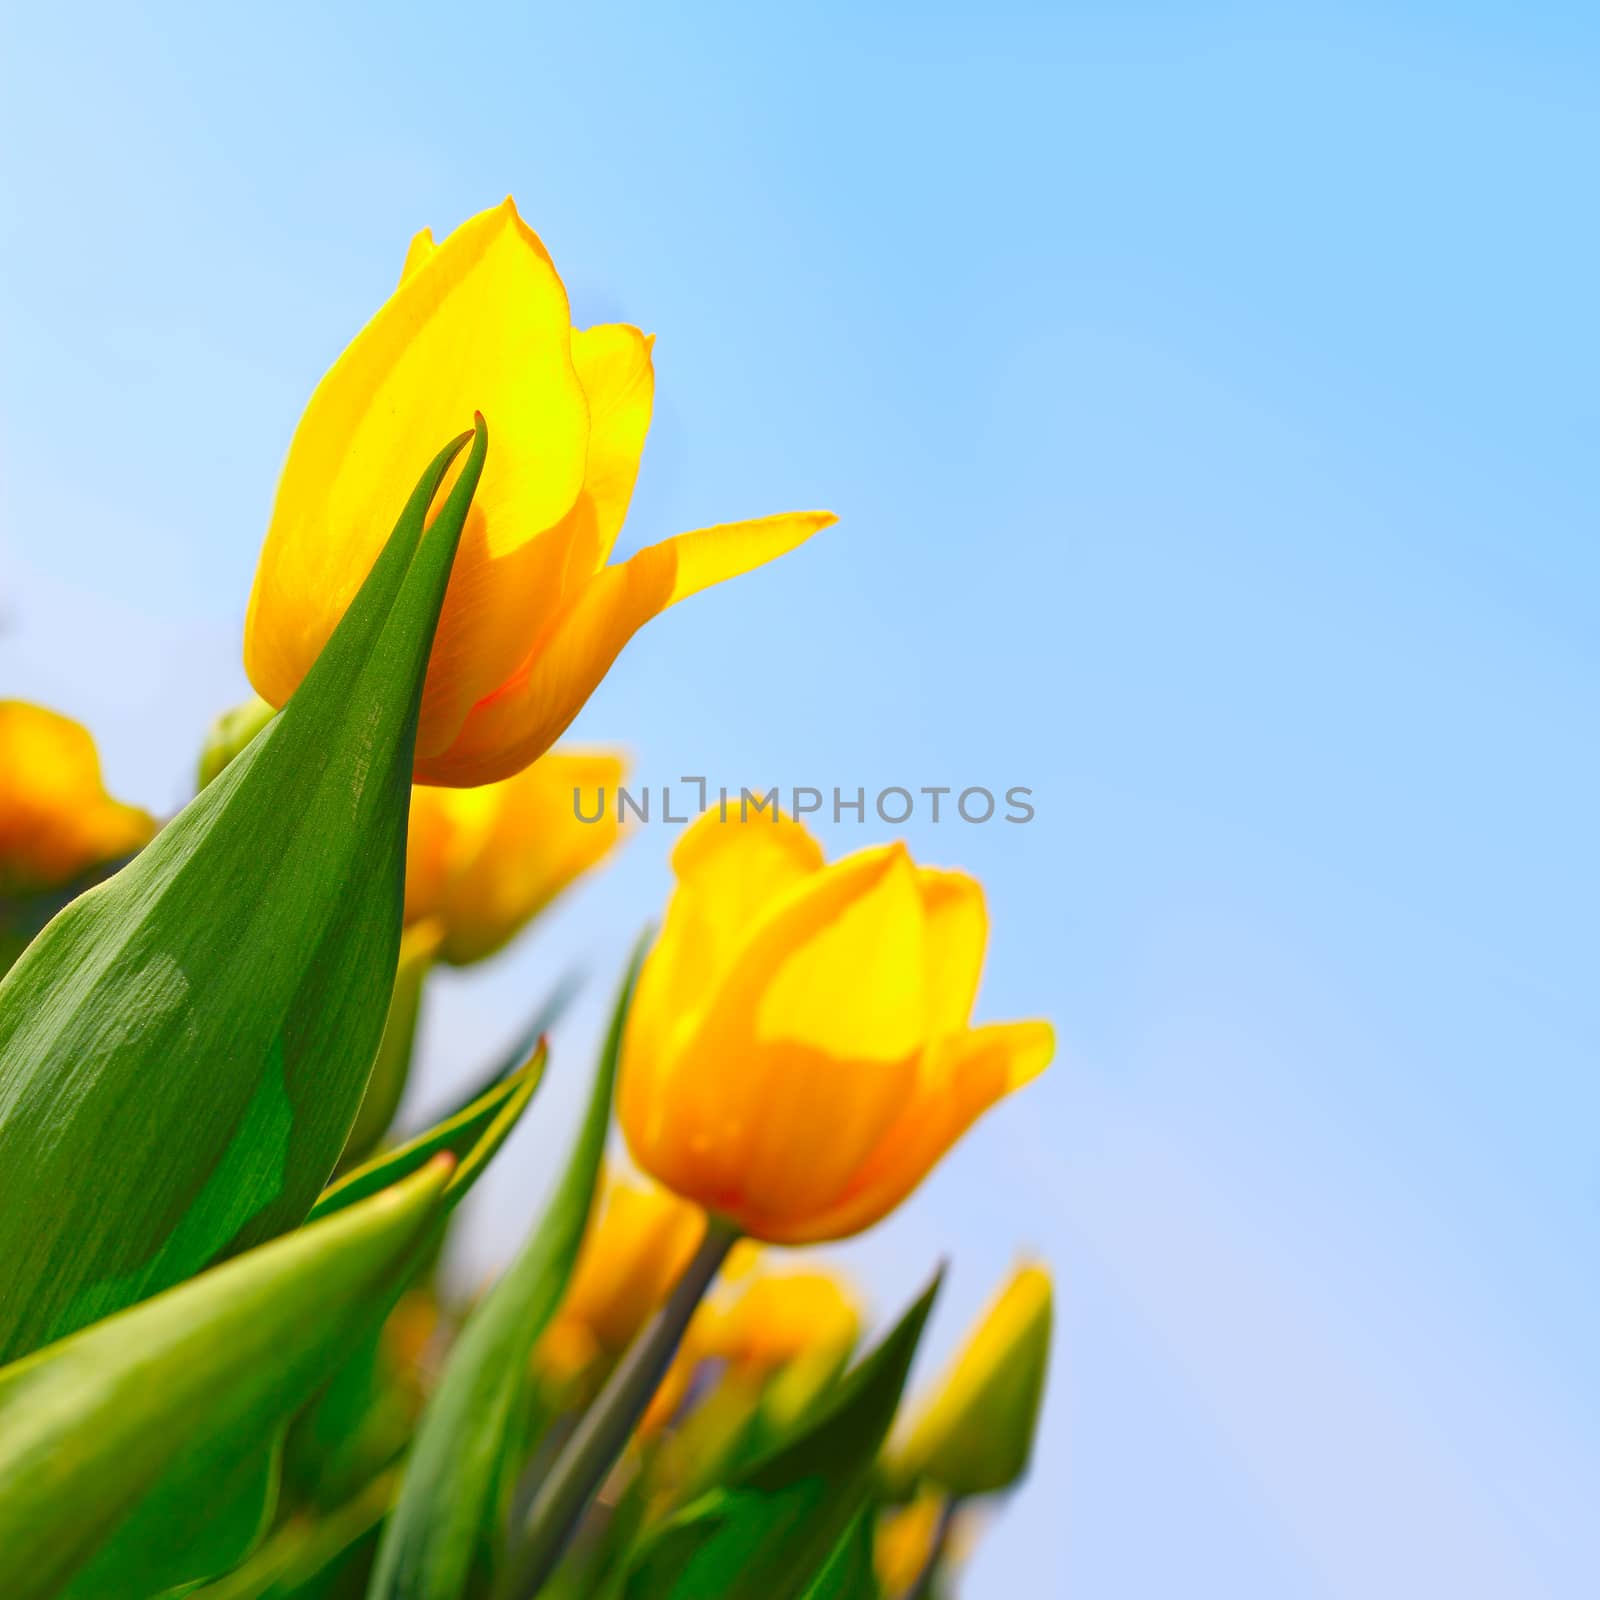 Yellow tulips in the garden over blue sky background